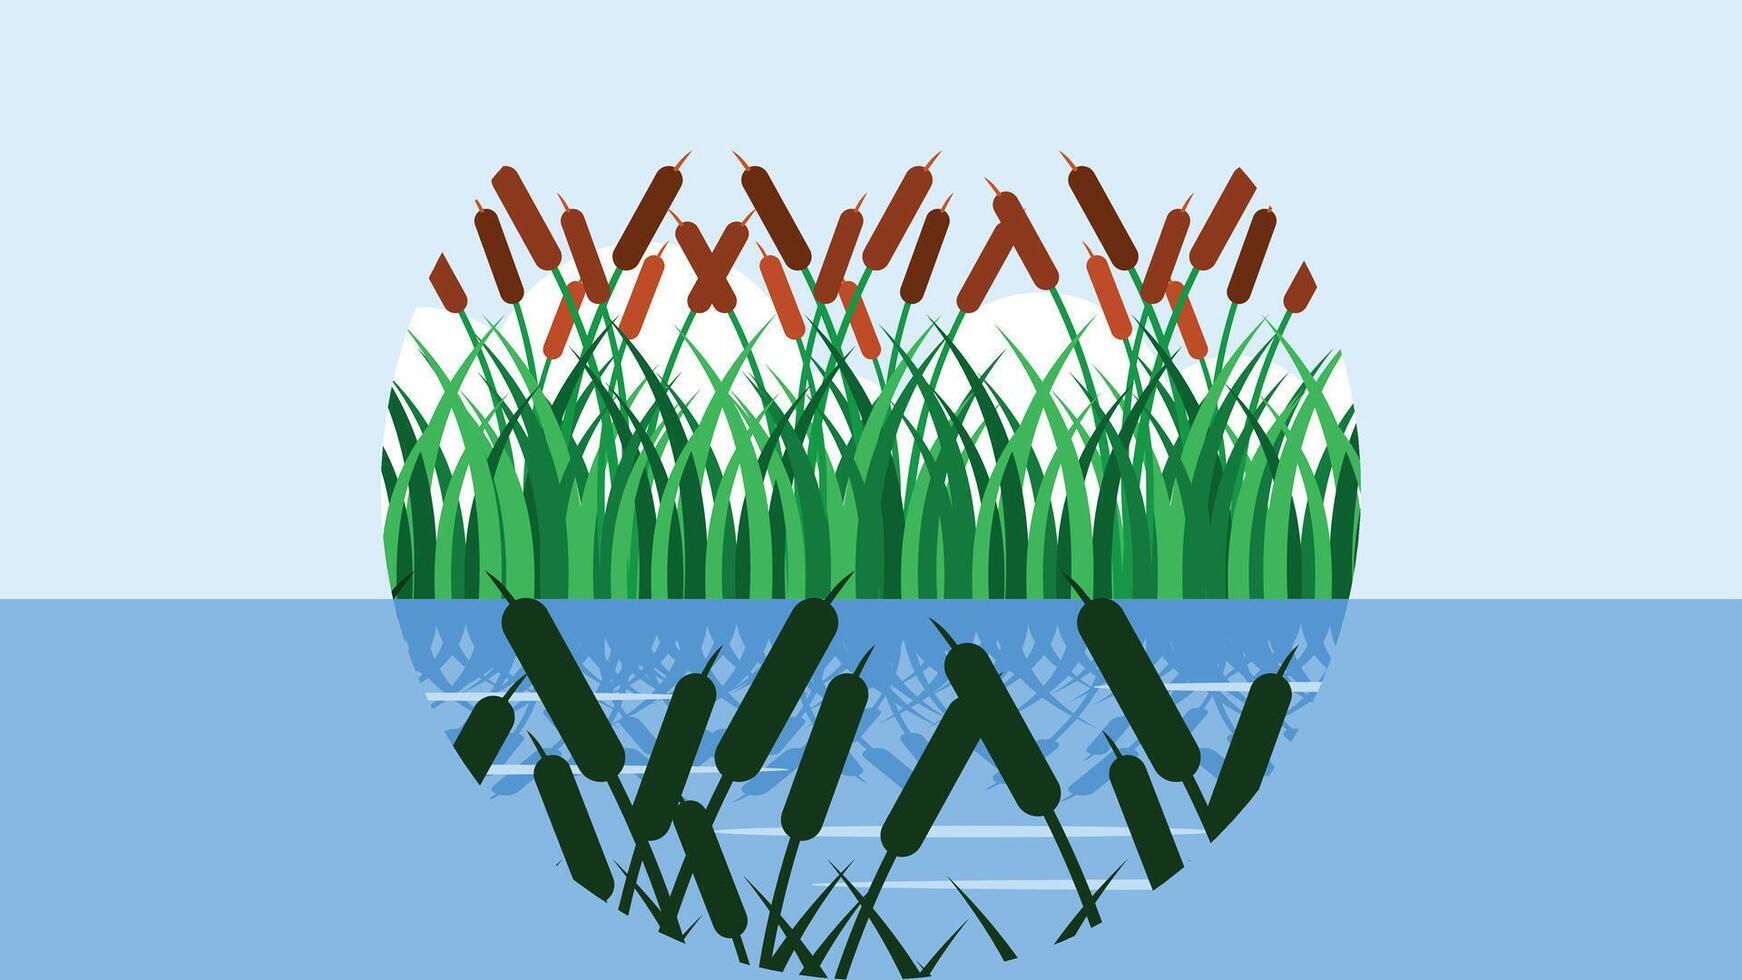 plants in the river side with green grass vector